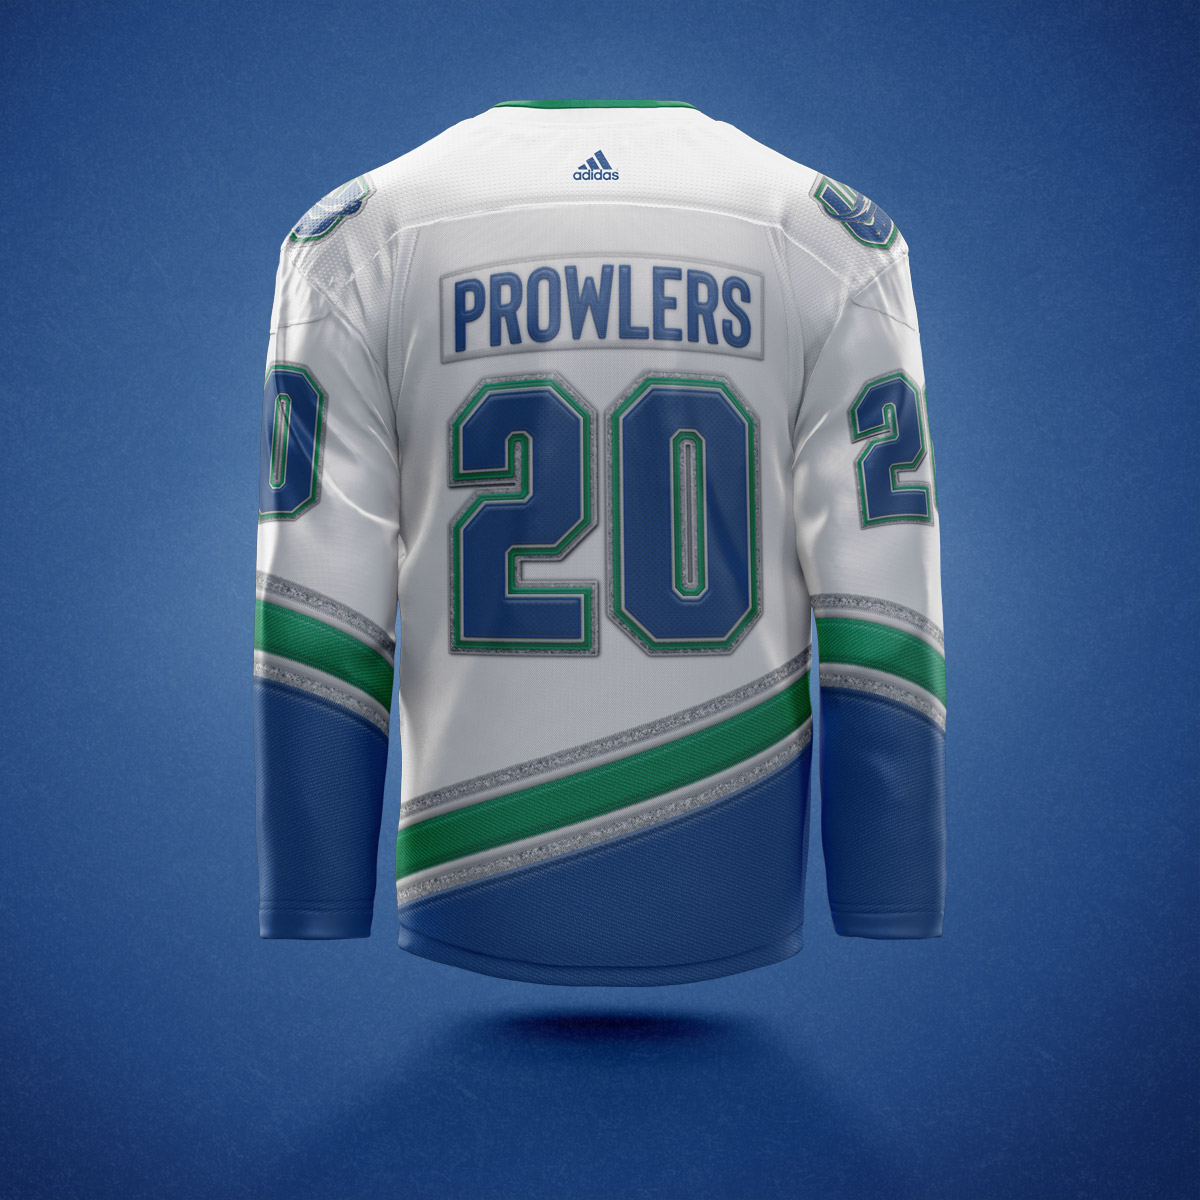 Comets Reveal Newest Jerseys, Paying Tribute to This Utica Staple